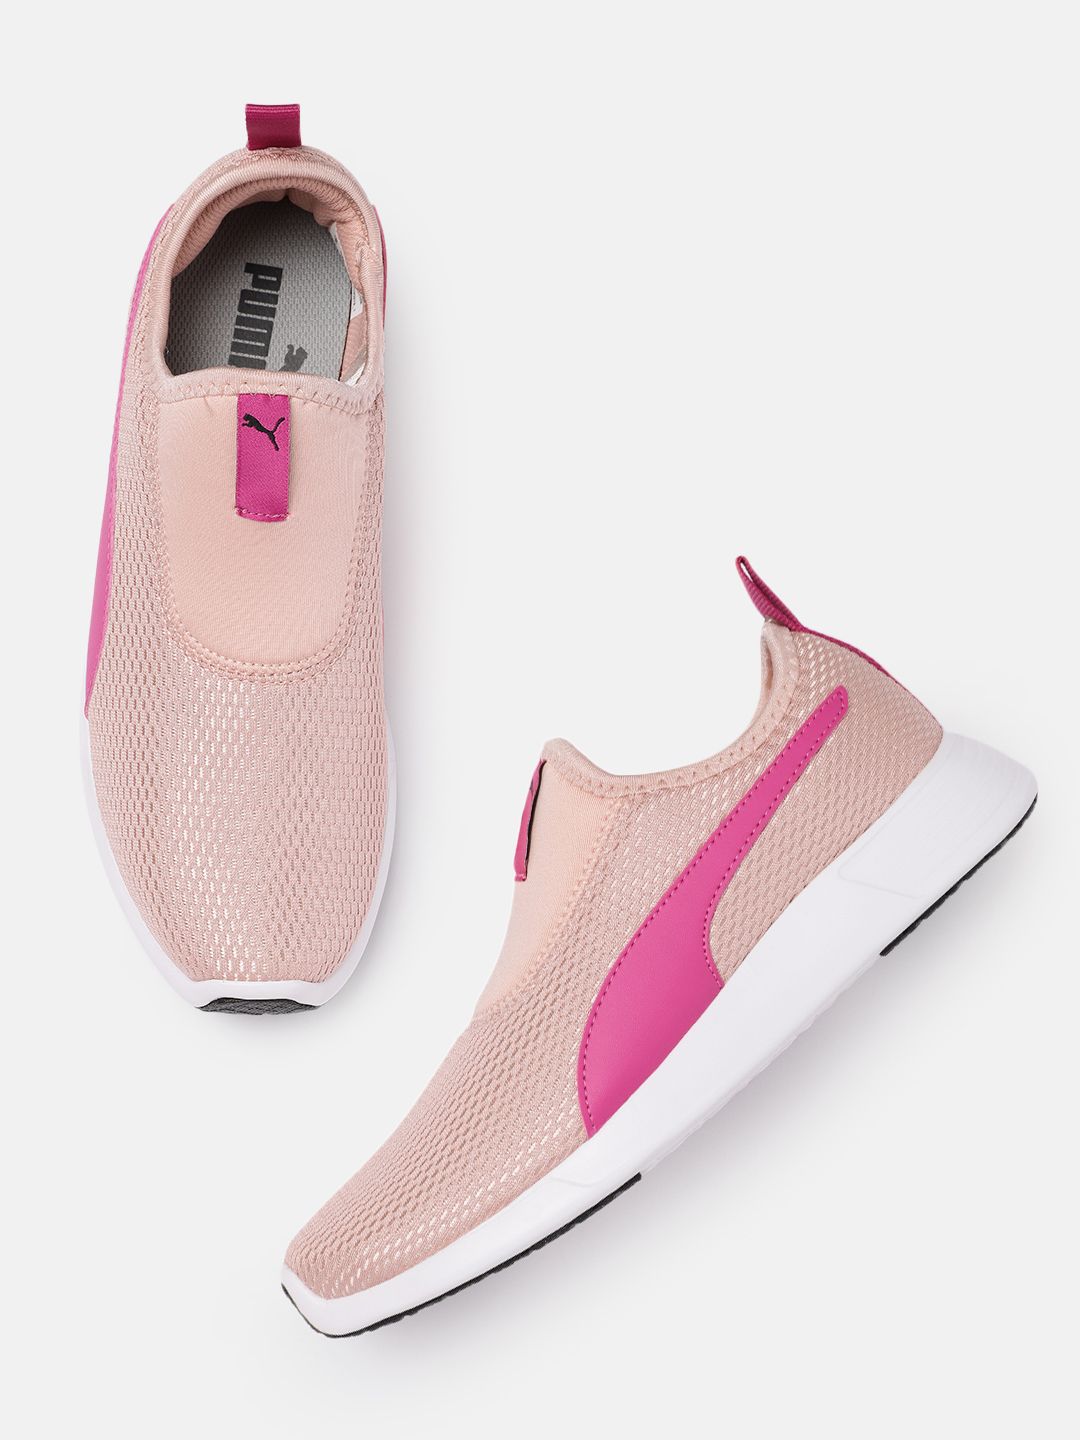 Puma Women Pink Solid Slip-On Sneakers Price in India